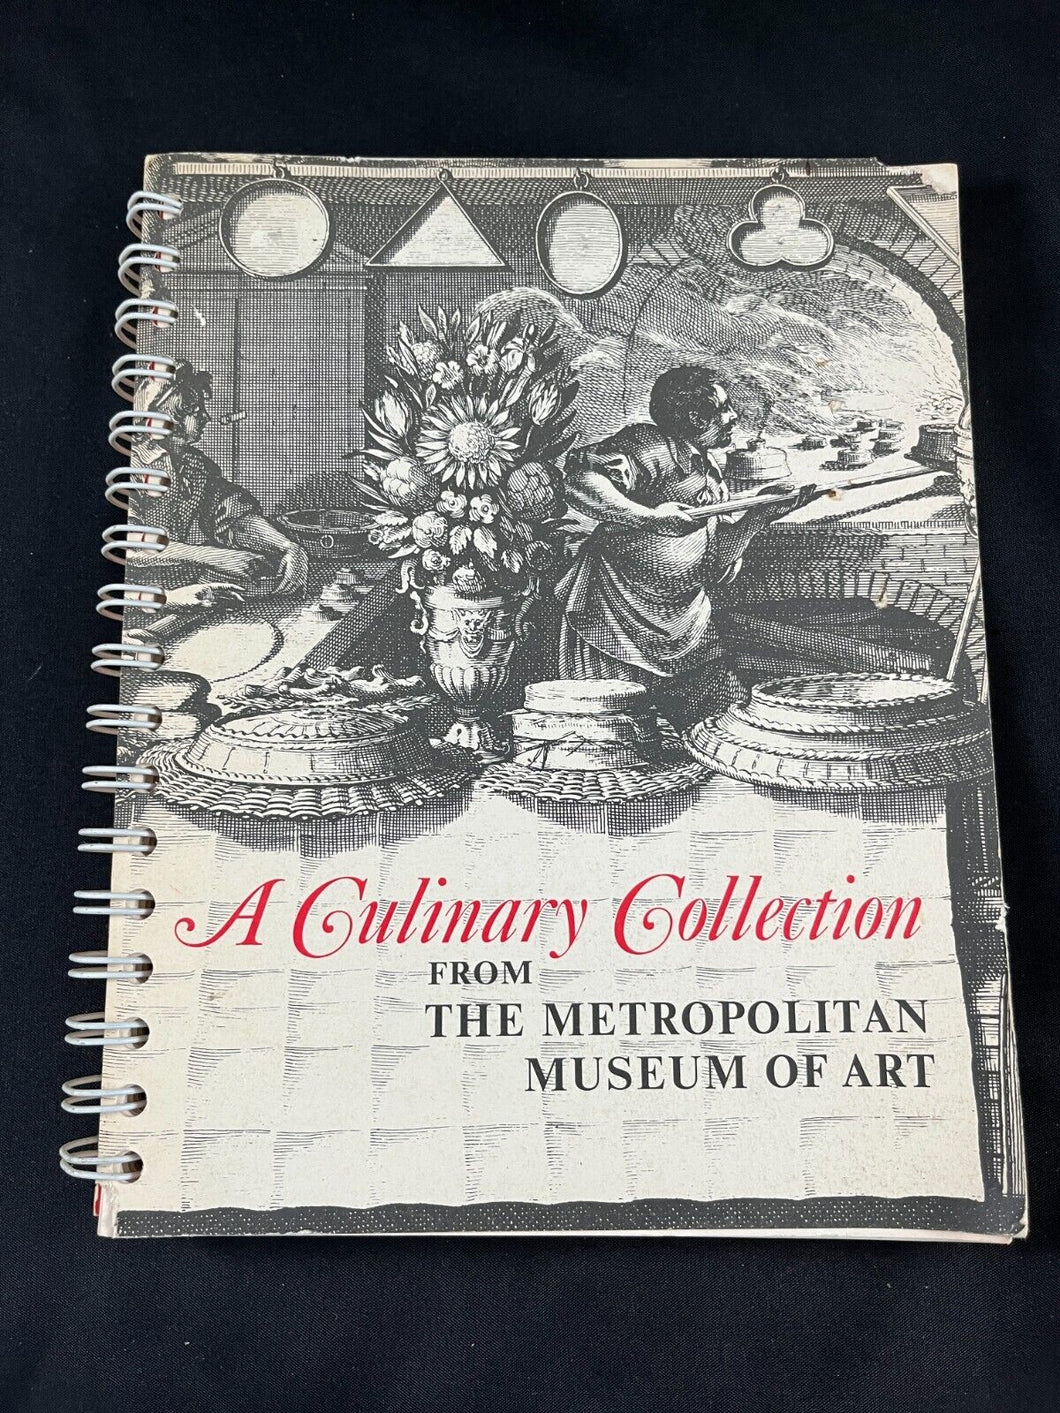 A Culinary Collection From The Metropolitan Museum of Art